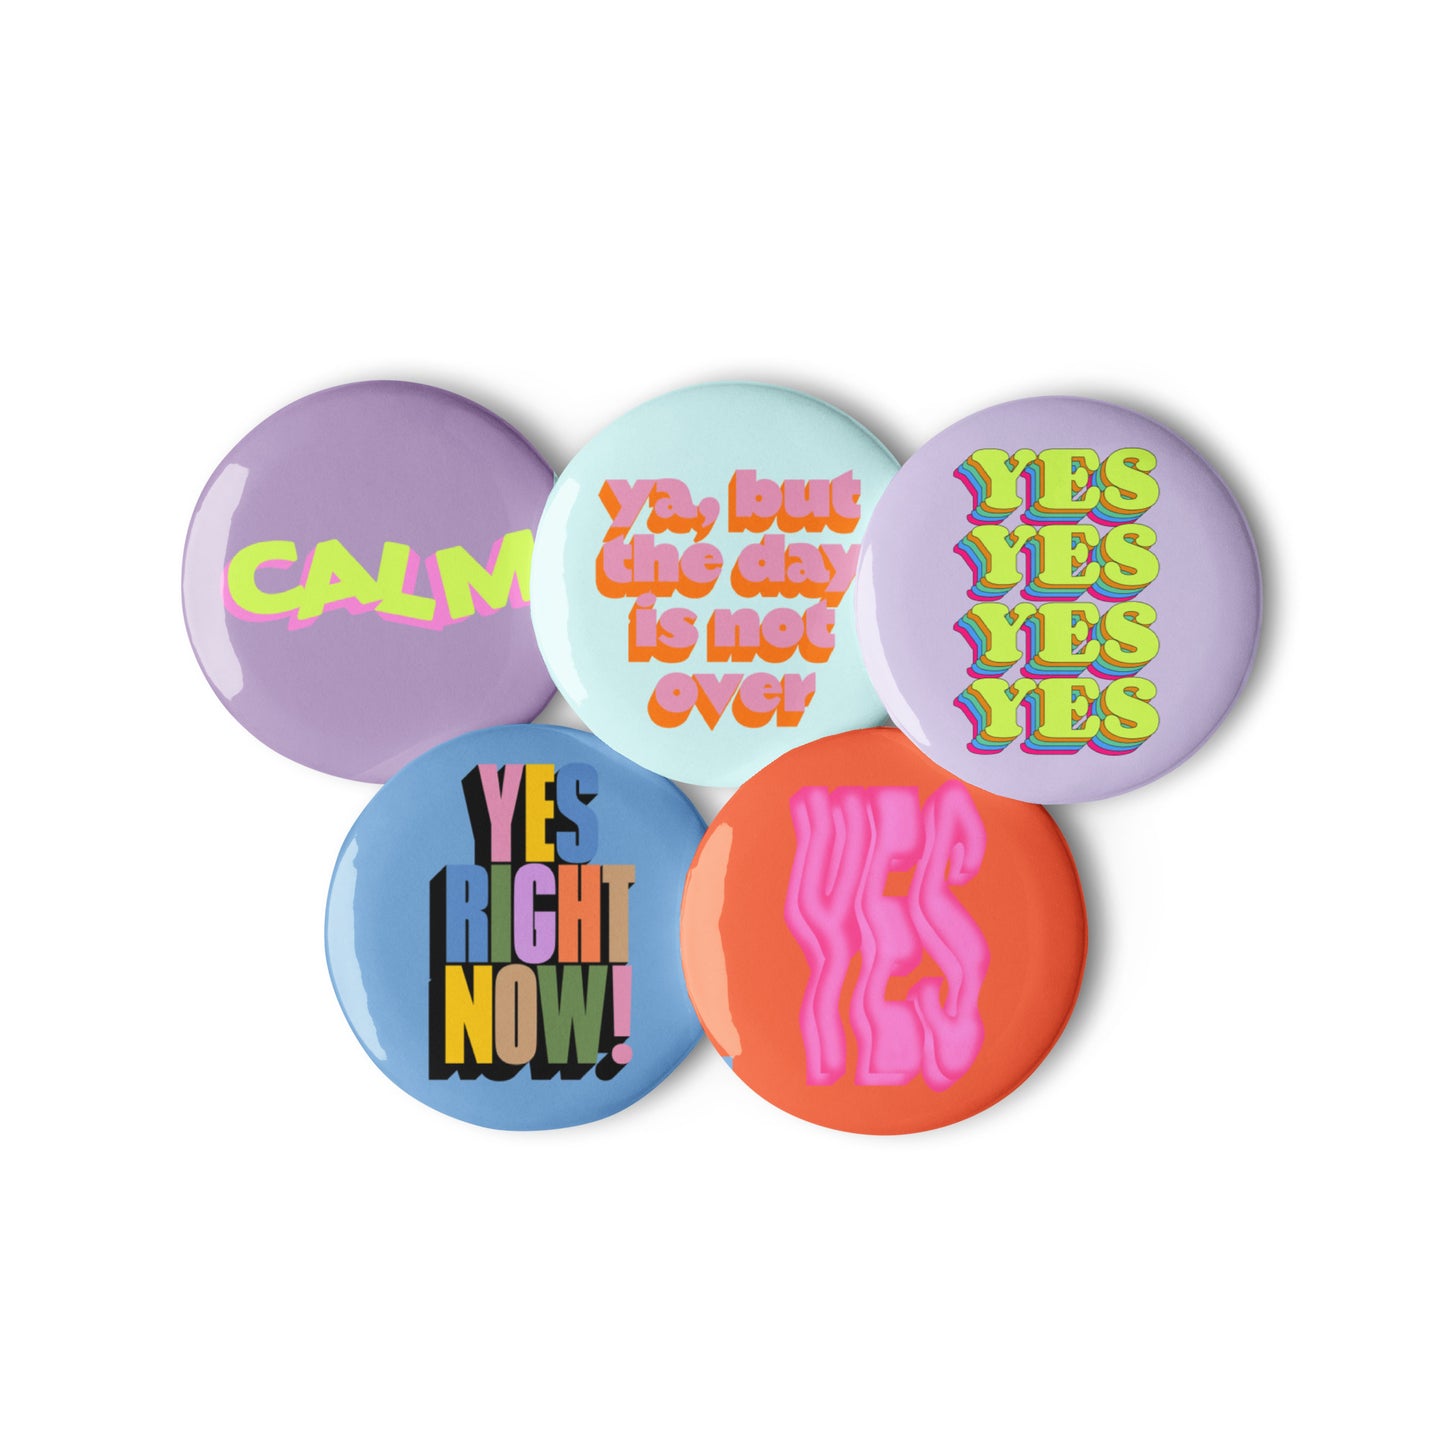 Typographic Pins 3 Set of pin buttons